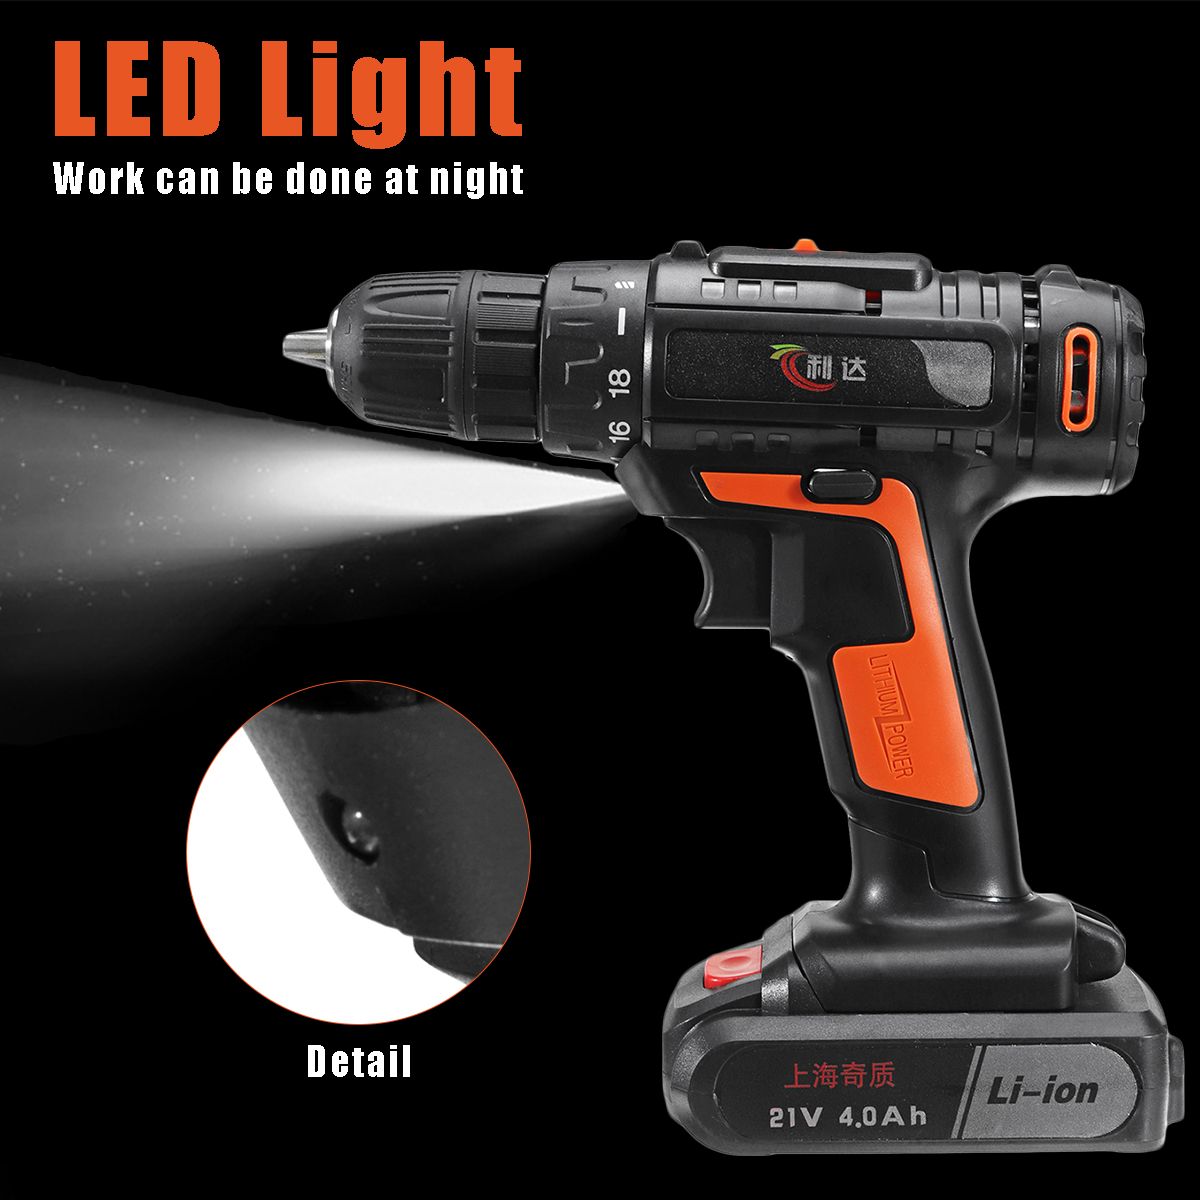 21V-4000mAh-Cordless-Rechargeable-Power-Drill-Driver-Electric-Screwdriver-with-1-or-2-Li-ion-Battery-1394607